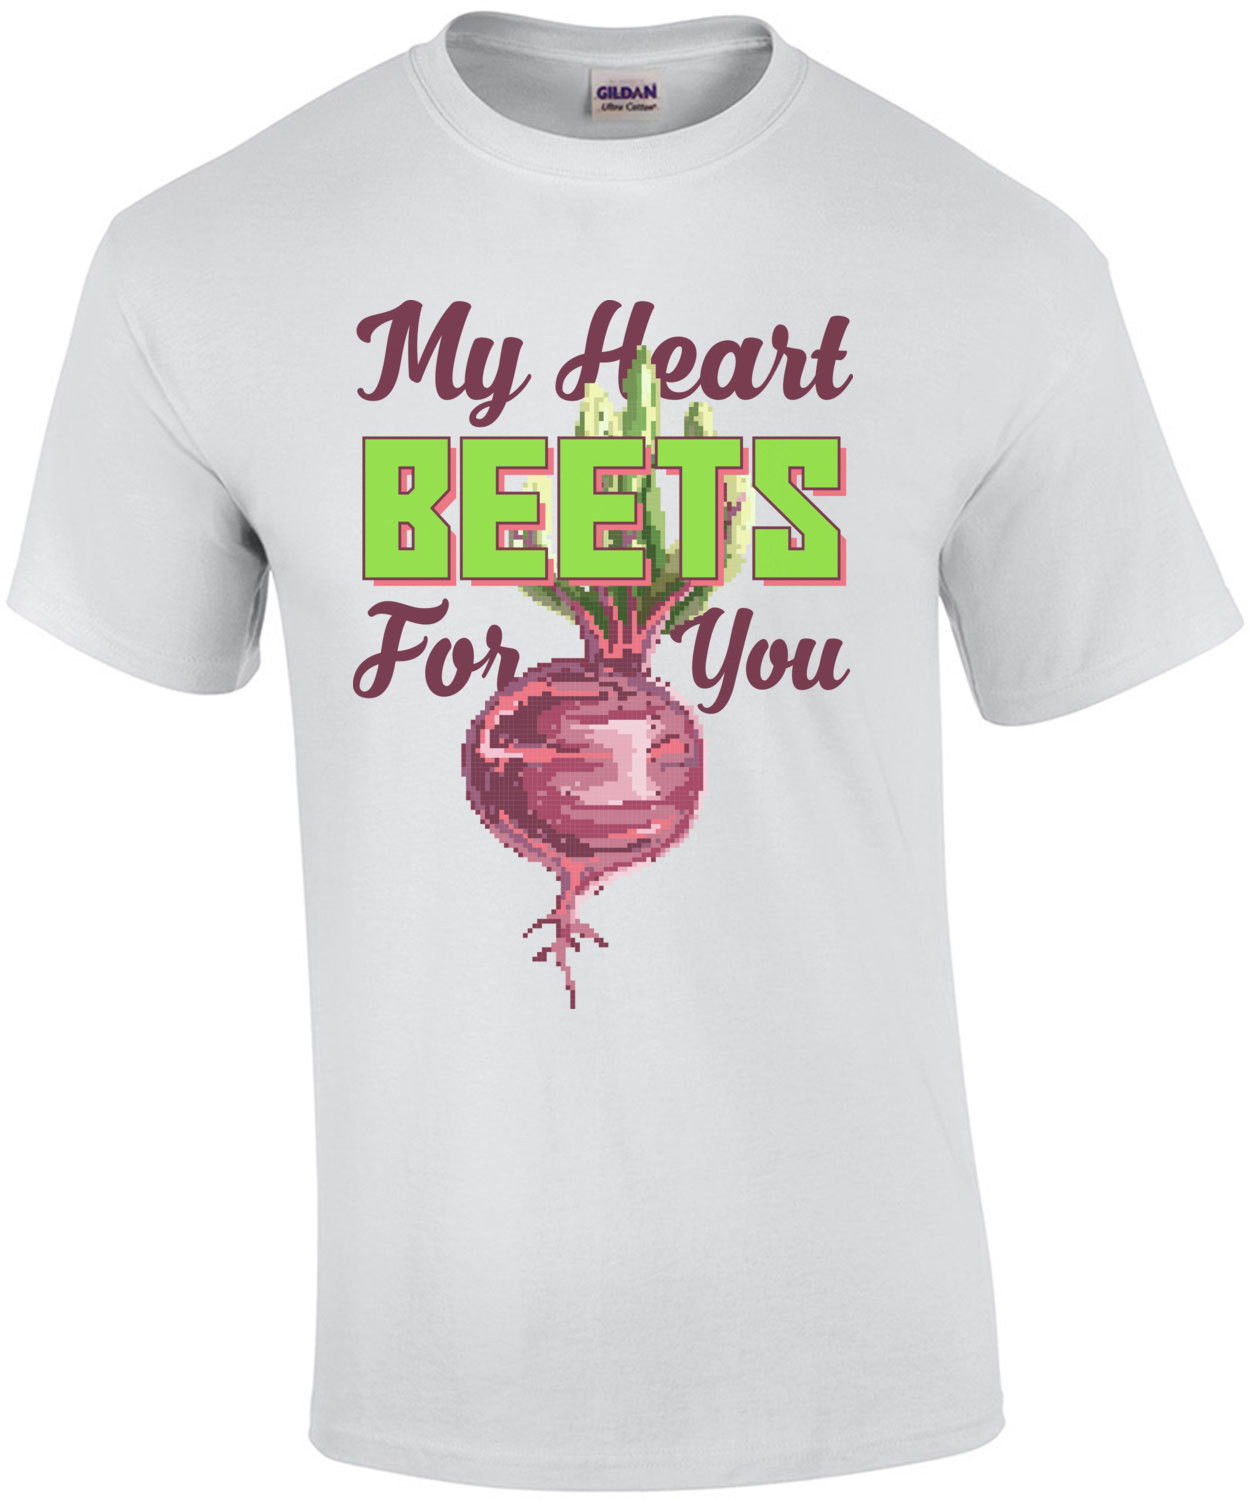 My Heart Beets For You Retro Pun T-Shirt